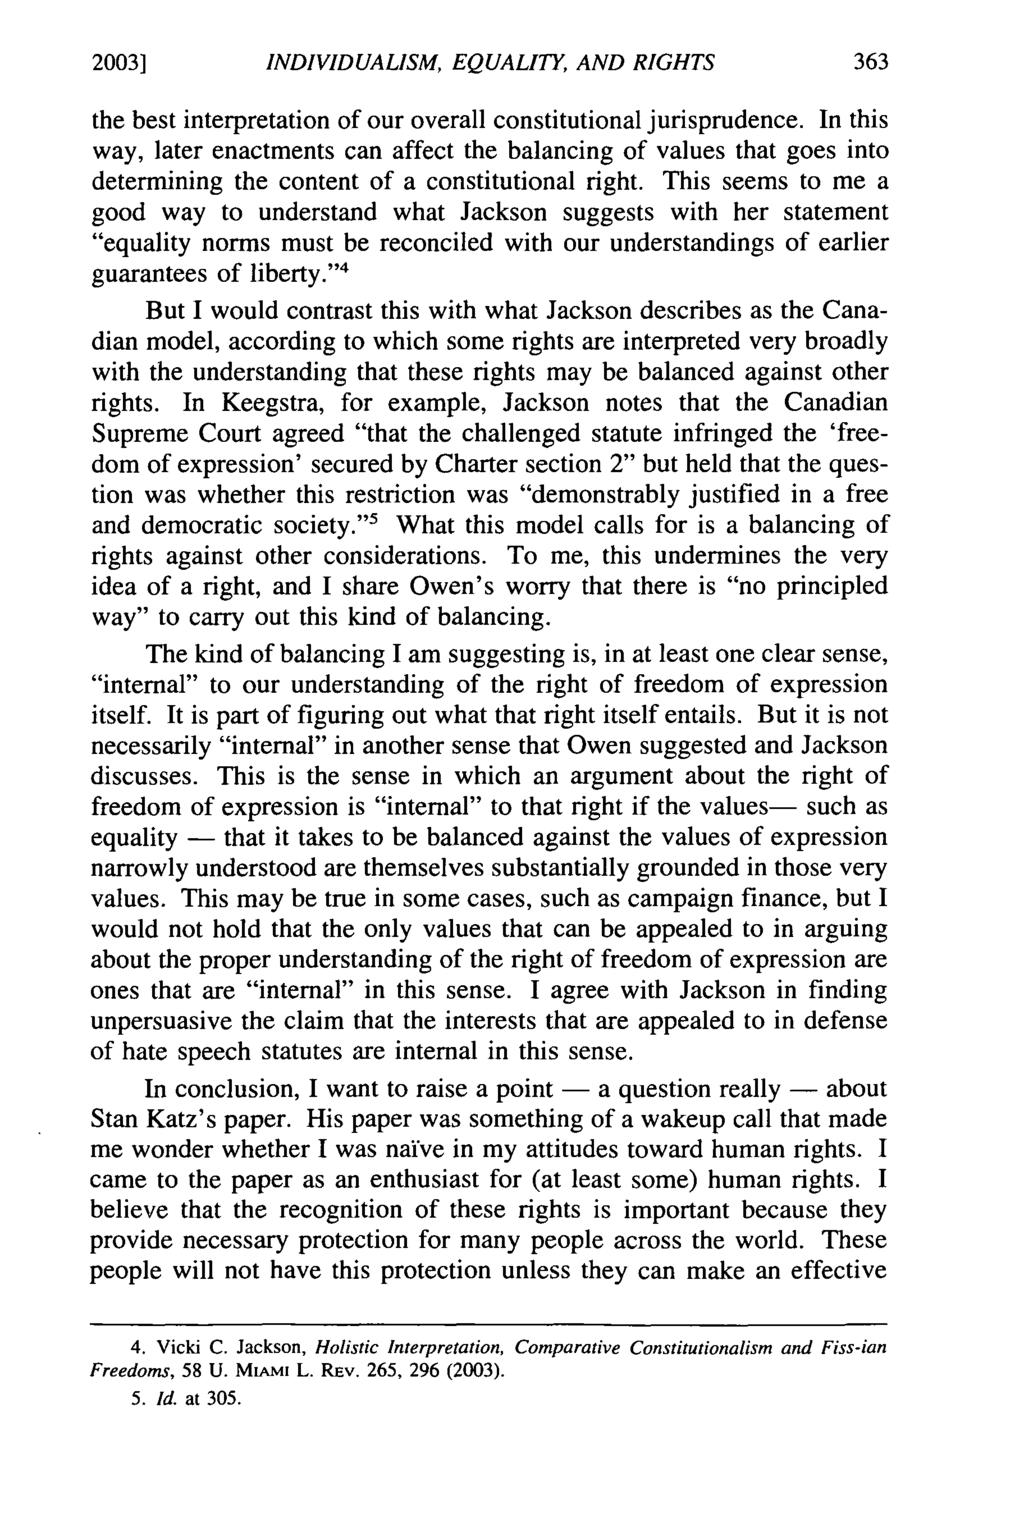 2003] INDIVIDUALISM, EQUALITY, AND RIGHTS the best interpretation of our overall constitutional jurisprudence.